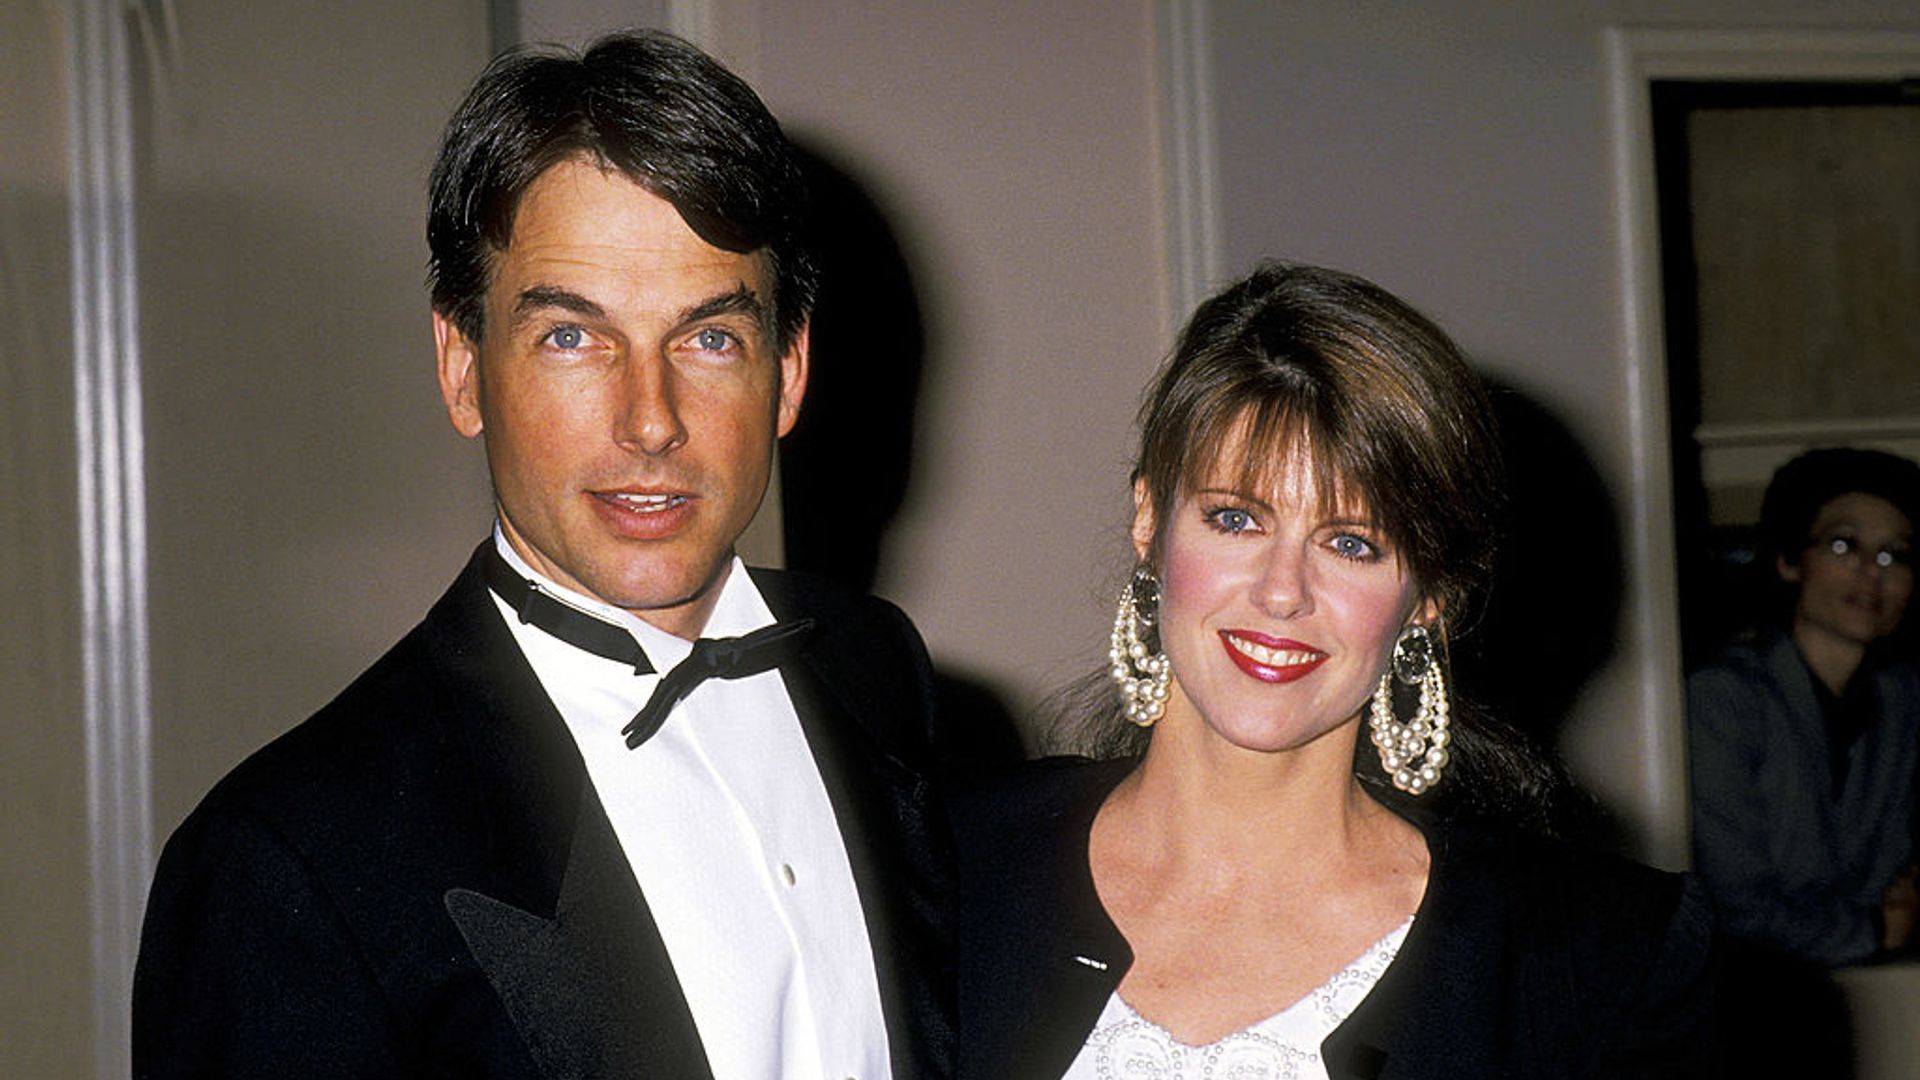 Mark Harmon wearing a tux and Pam wearing a white dress and a black jacket at an event hosted by theAmerican Film Institute